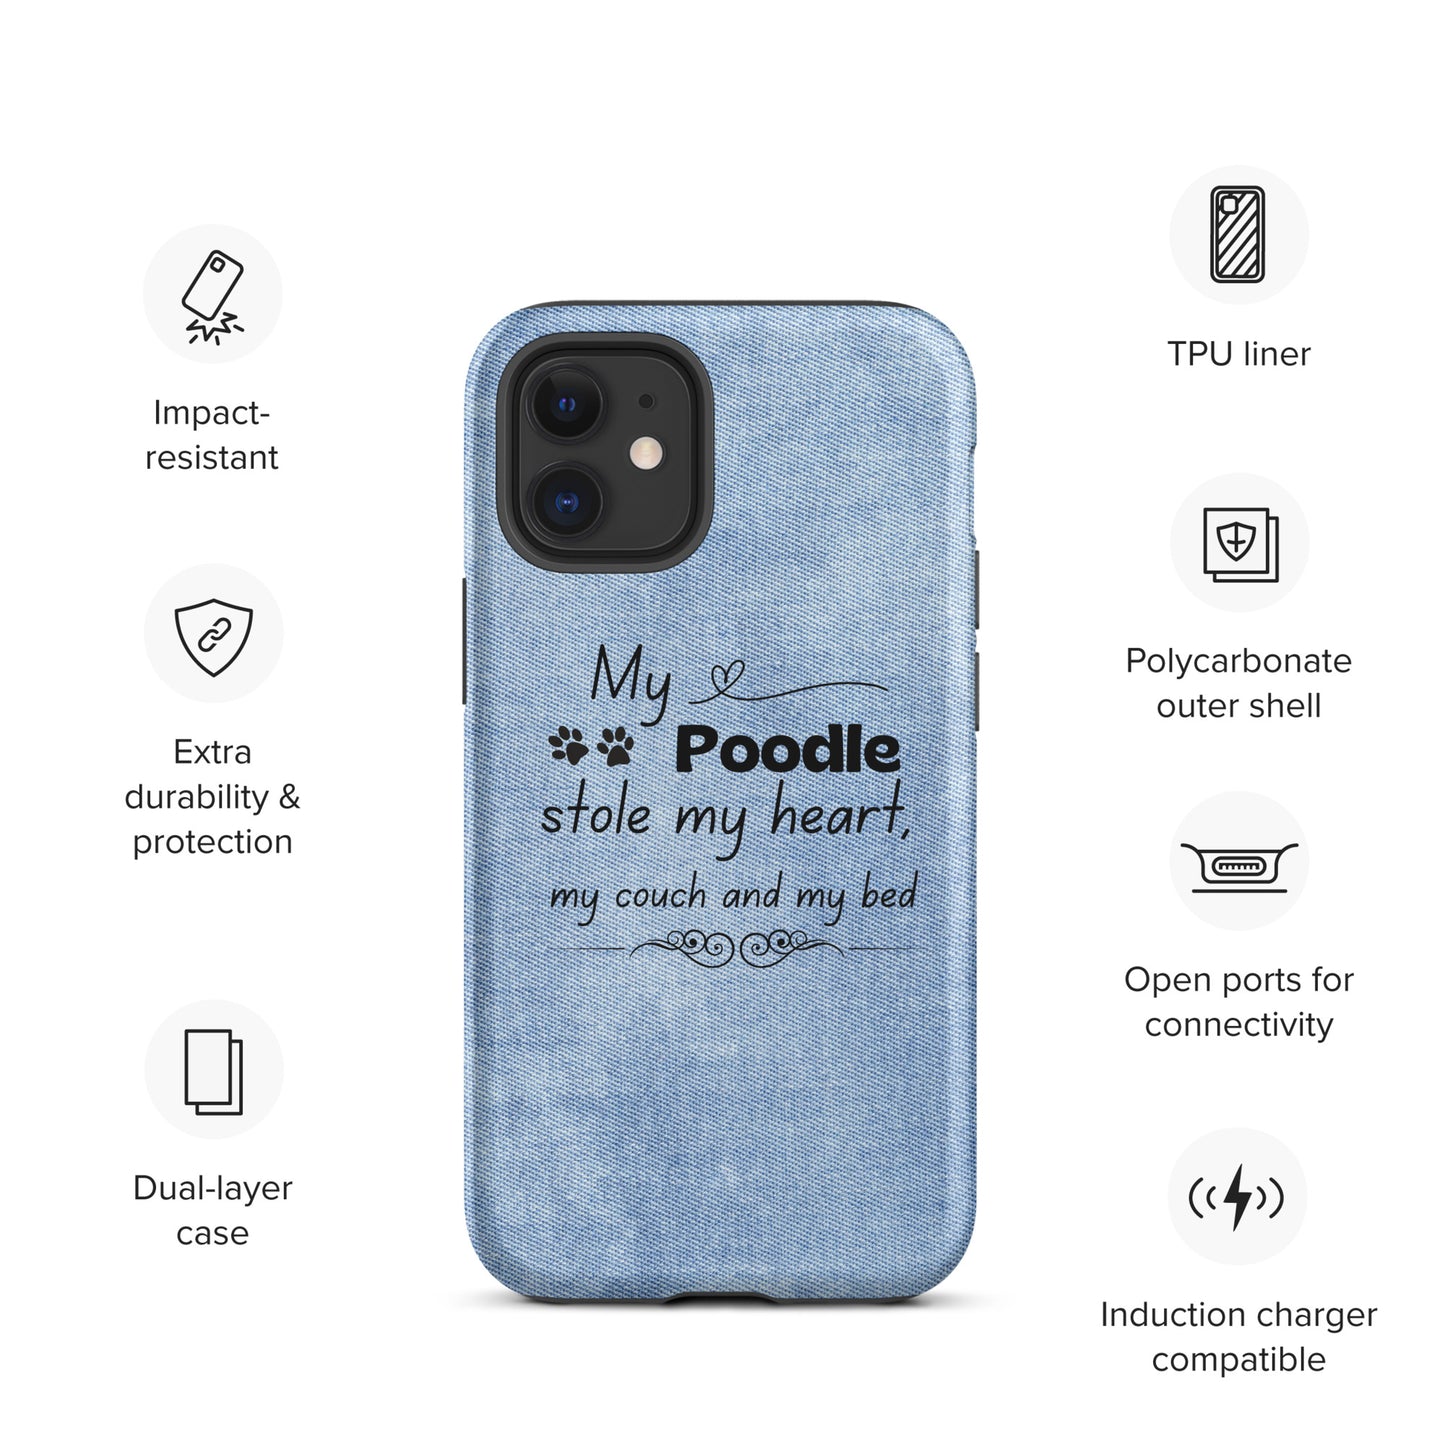 iPhone case 'My Poodle stole my heart..'